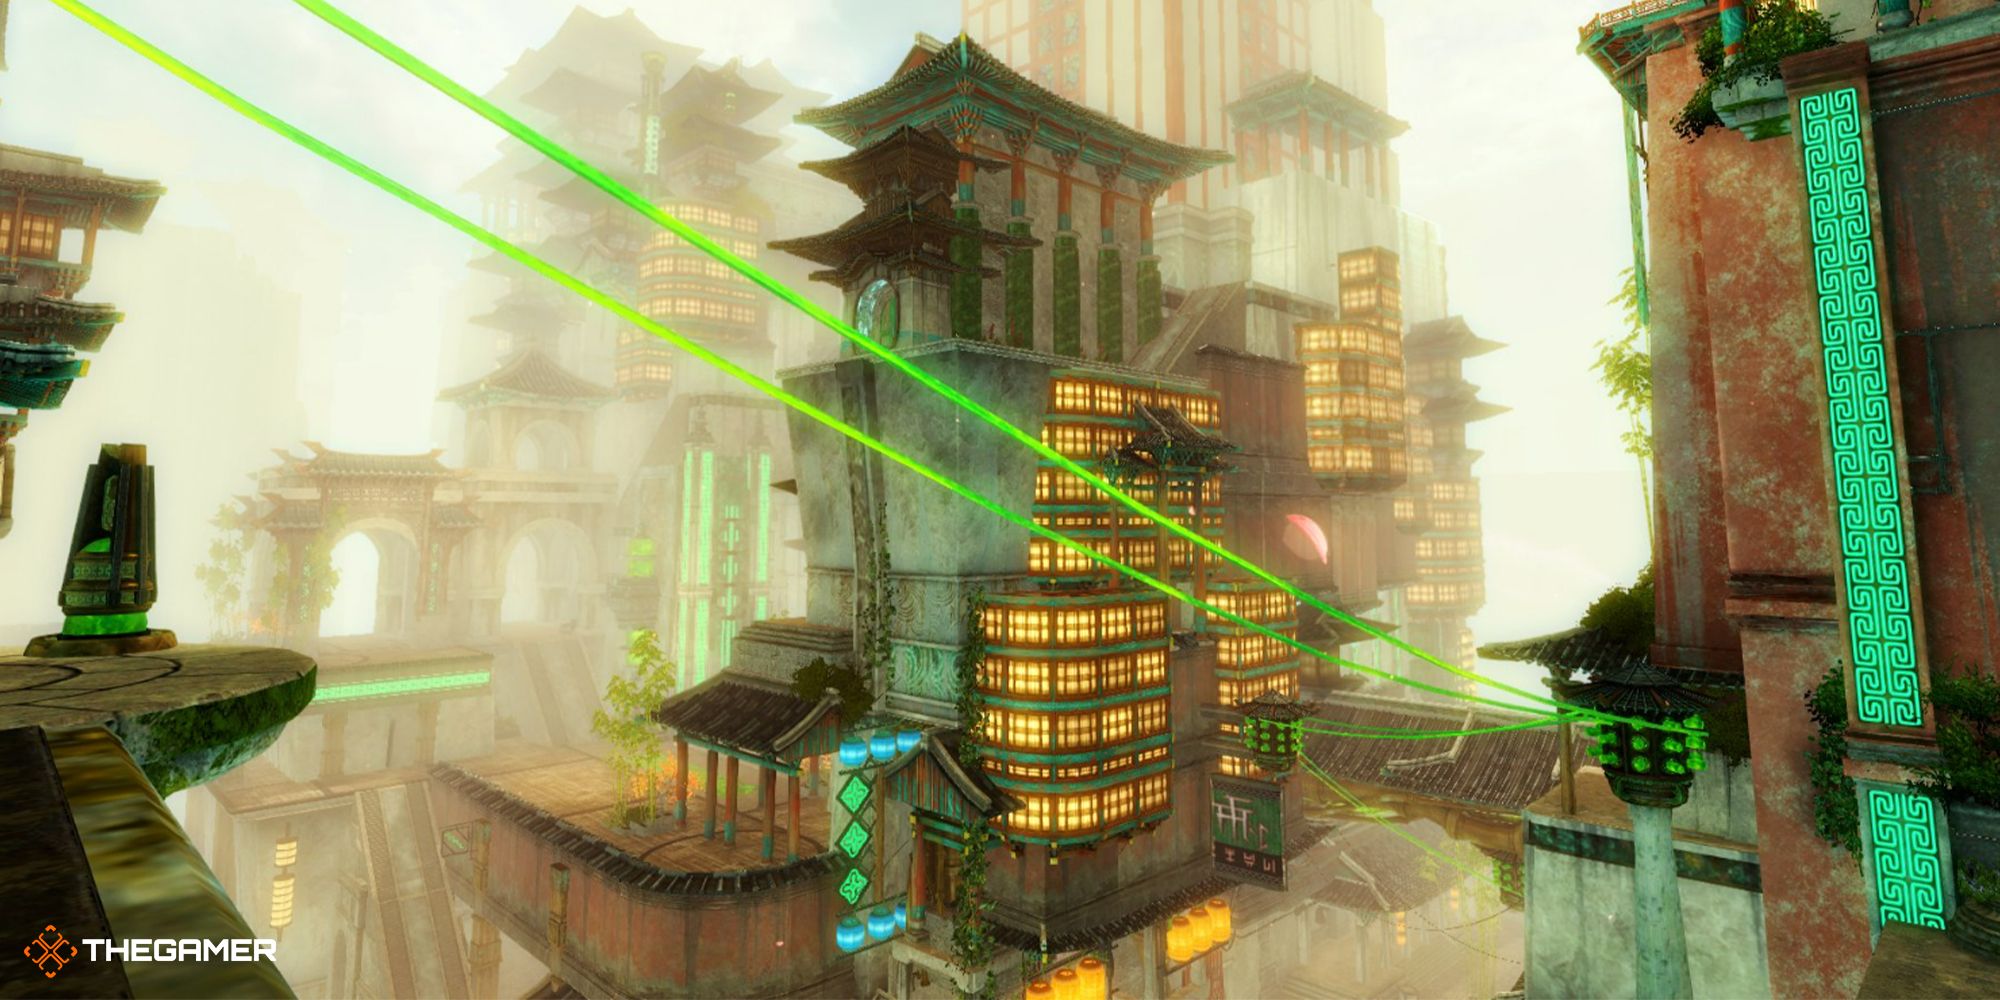 Guild Wars 2 - Cantha, New Kaineng City